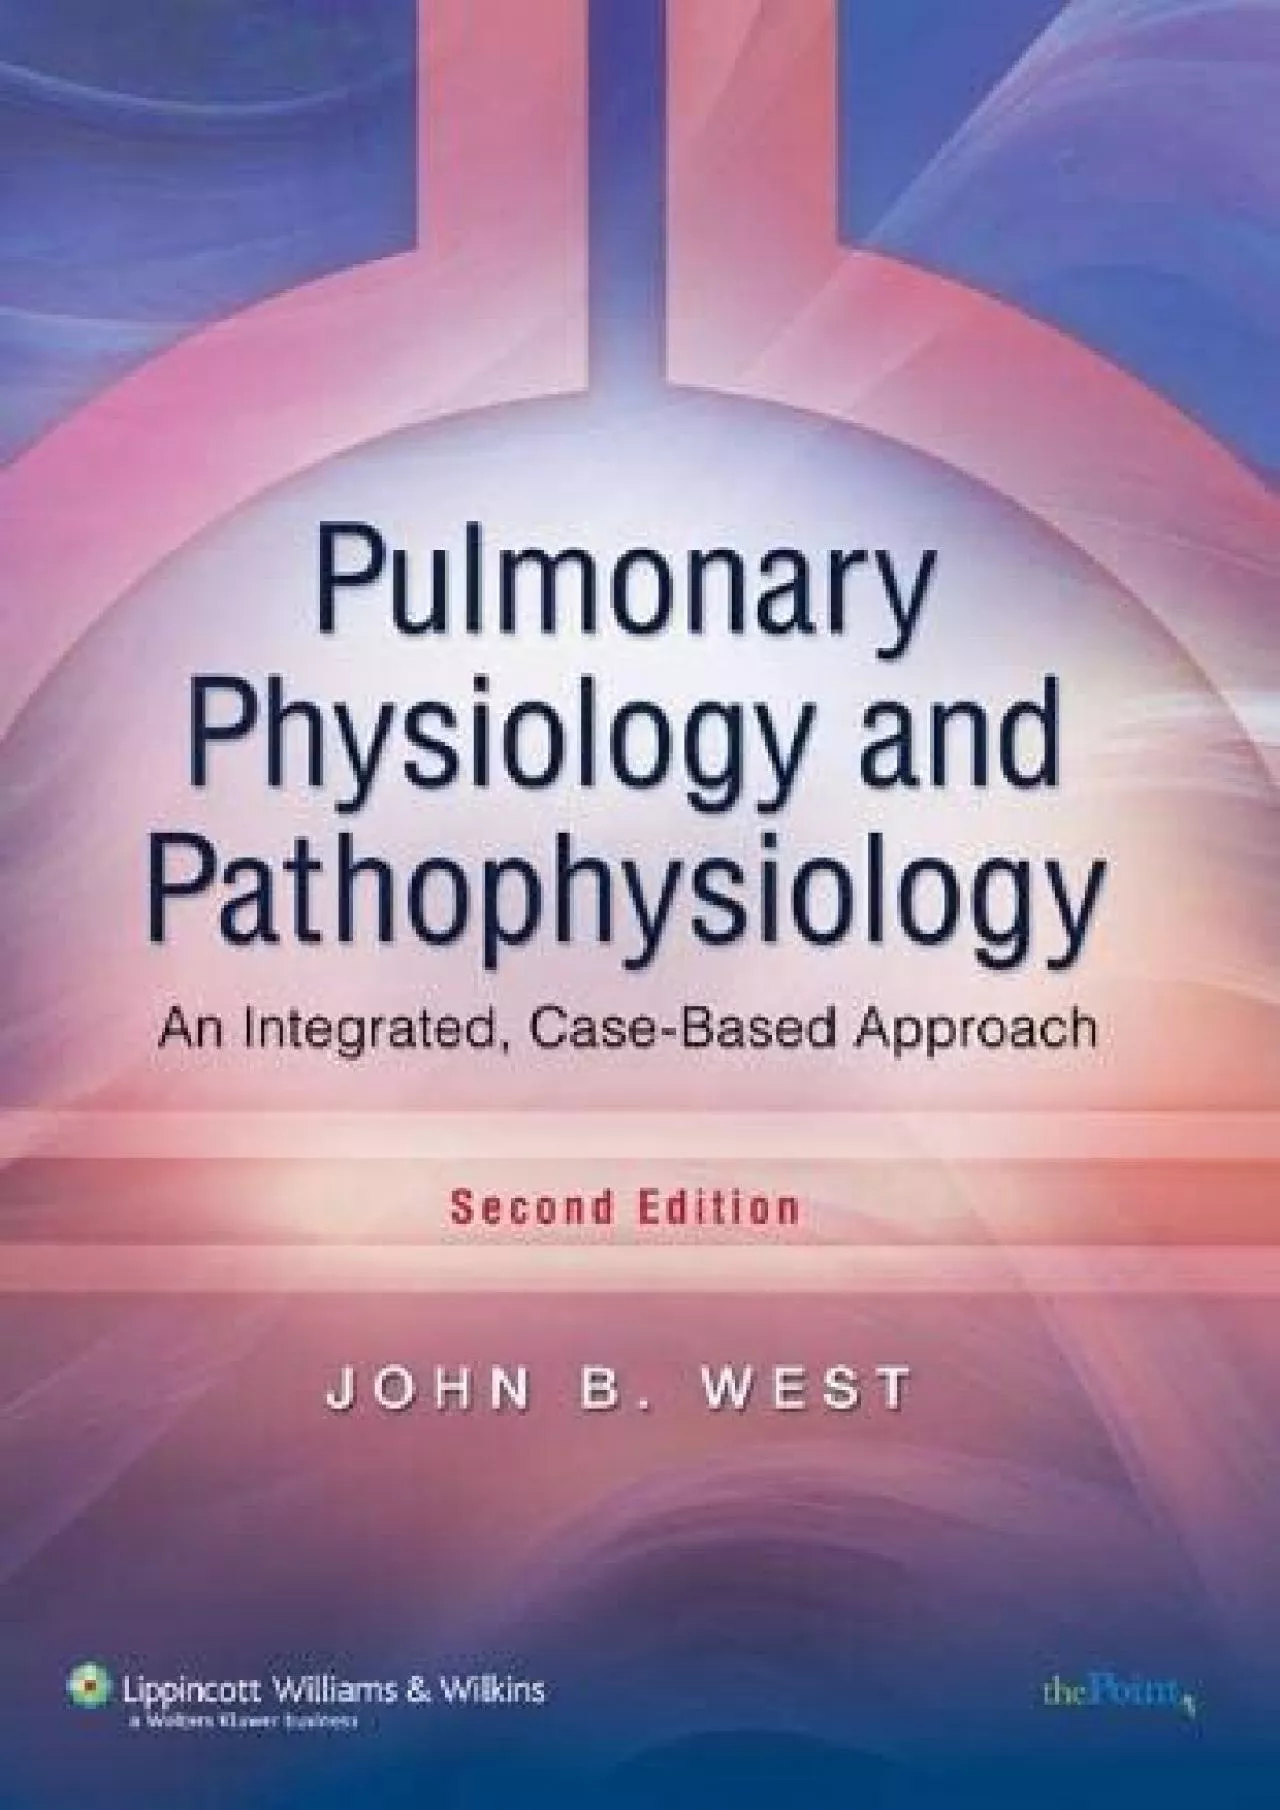 (EBOOK)-Pulmonary Physiology and Pathophysiology: An Integrated, Case-Based Approach (Point